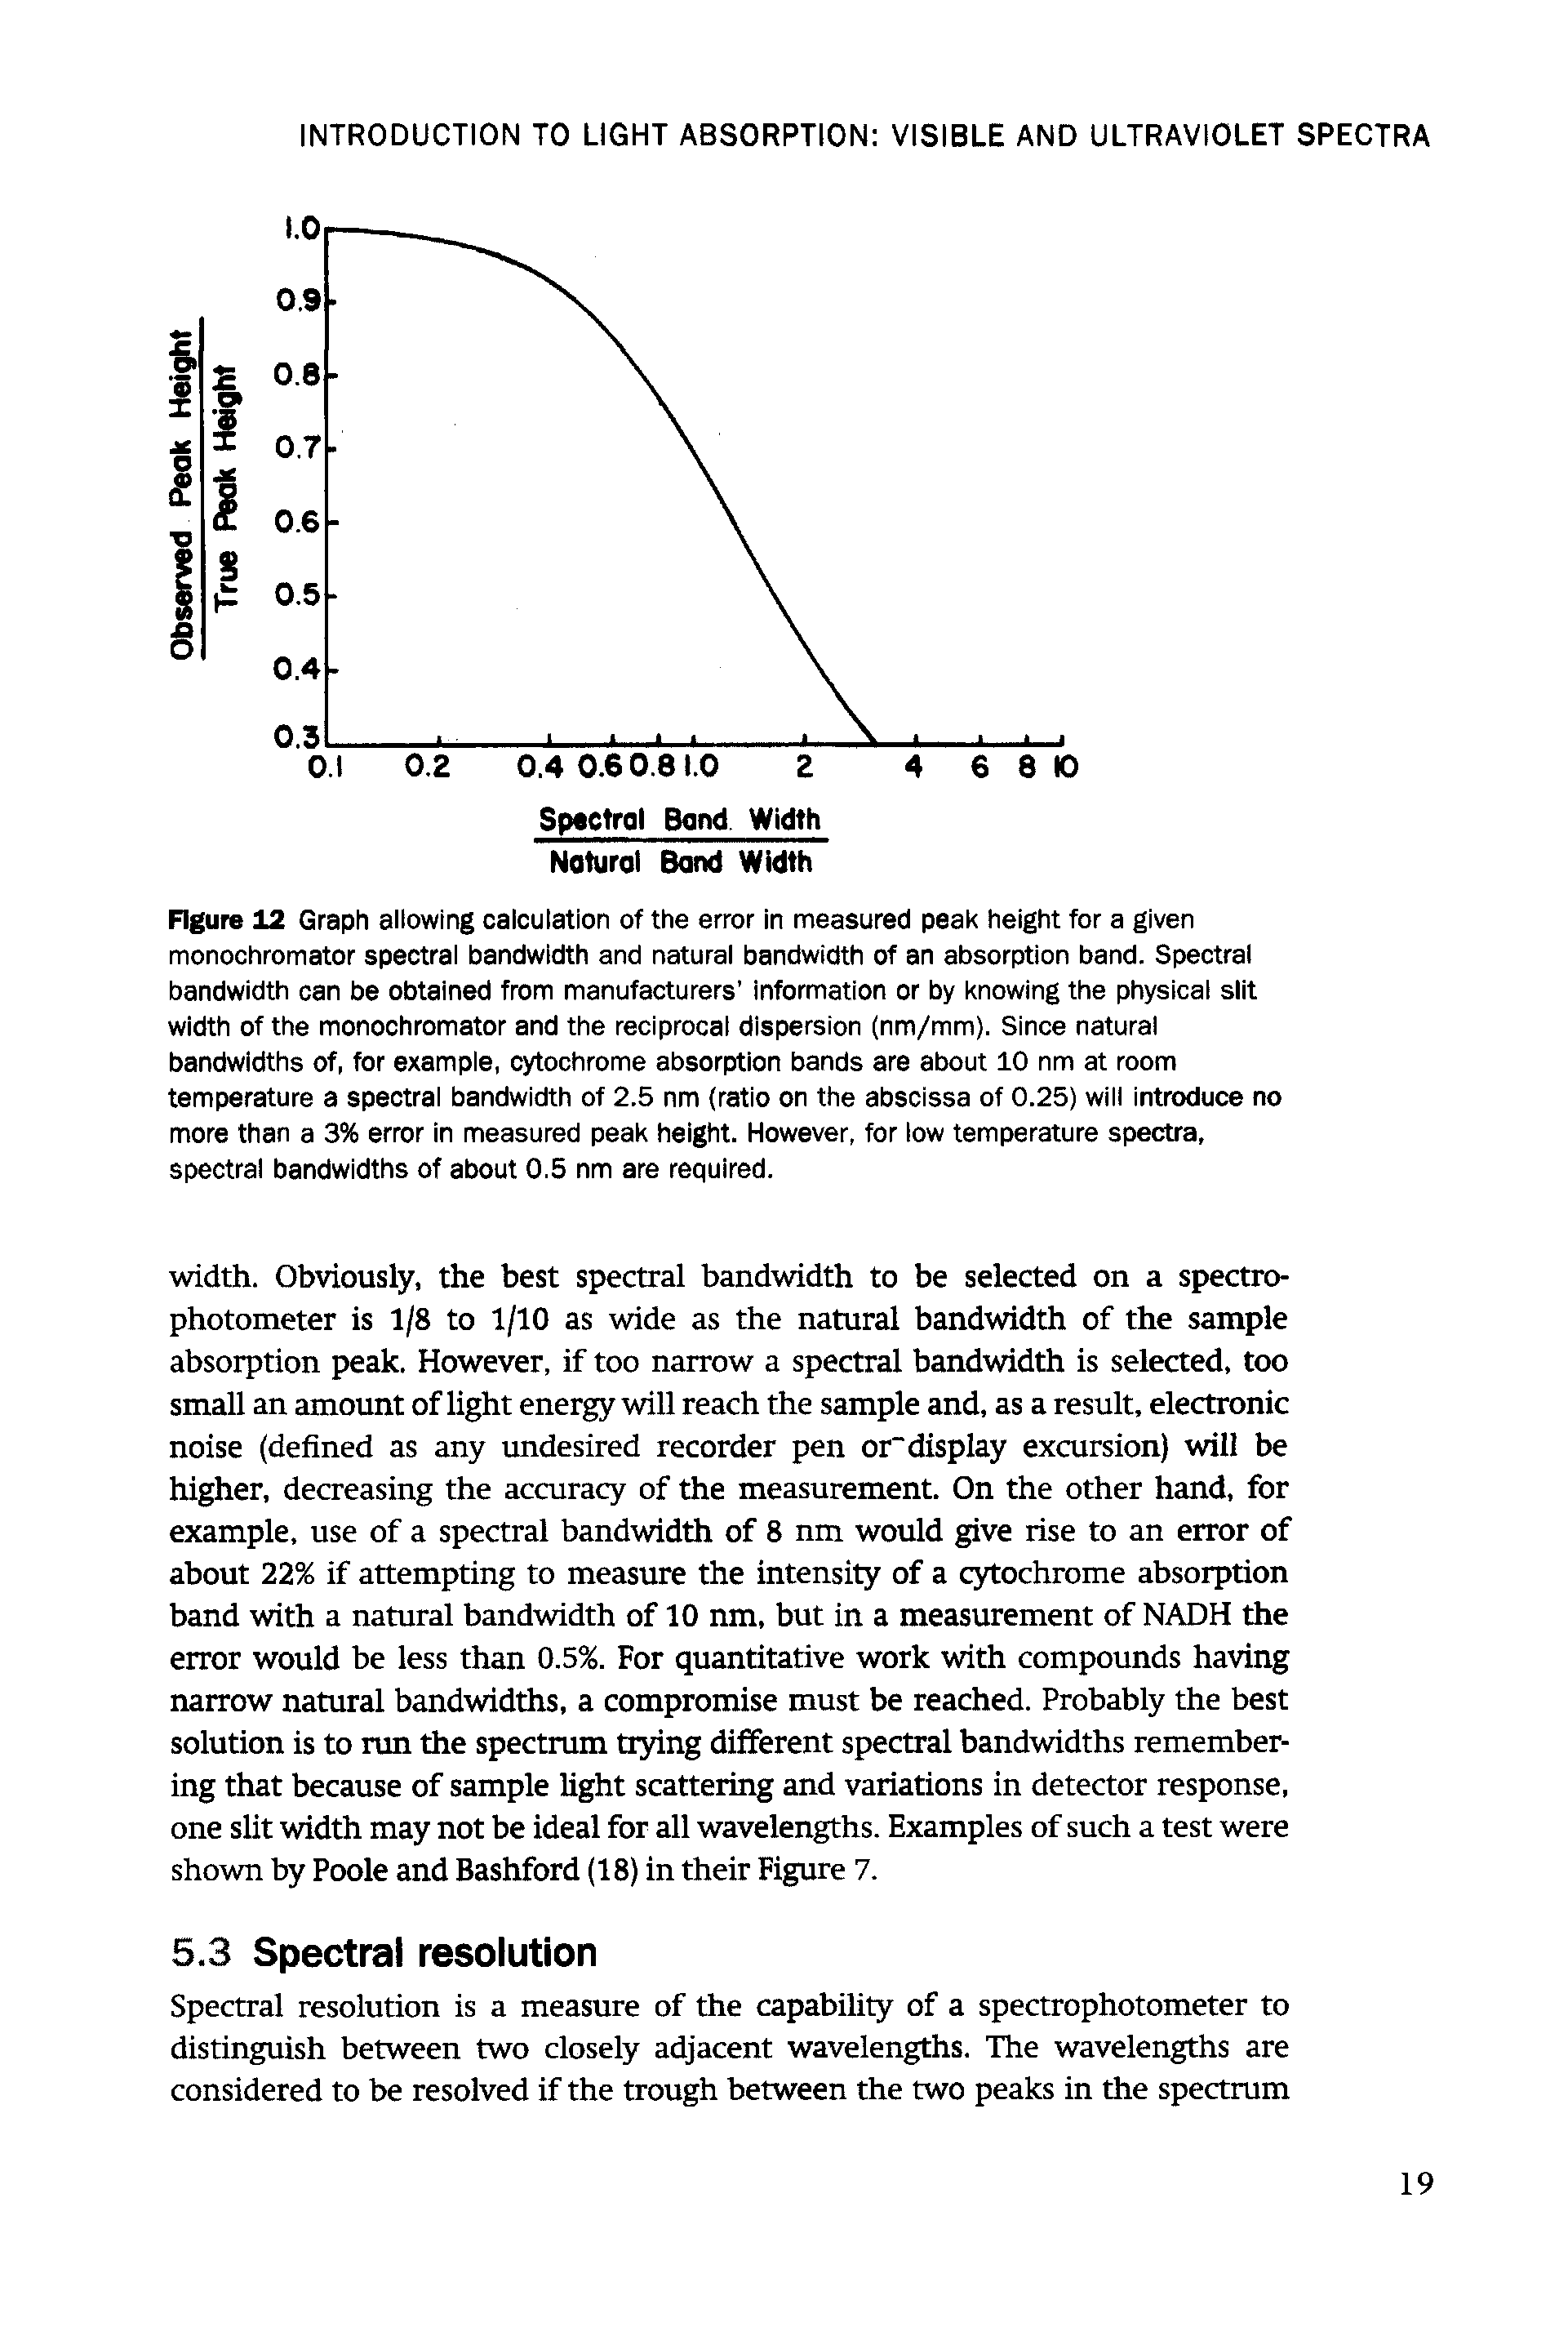 Figure 12 Graph allowing calculation of the error In measured peak height for a given monochromator spectral bandwidth and natural bandwidth of an absorption band. Spectral bandwidth can be obtained from manufacturers Information or by knowing the physical slit width of the monochromator and the reciprocal dispersion (nm/mm). Since natural bandwidths of, for example, cytochrome absorption bands are about 10 nm at room temperature a spectral bandwidth of 2.5 nm (ratio on the abscissa of 0.25) will Introduce no more than a 3% error in measured peak height. However, for low temperature spectra, spectral bandwidths of about 0.5 nm are required.